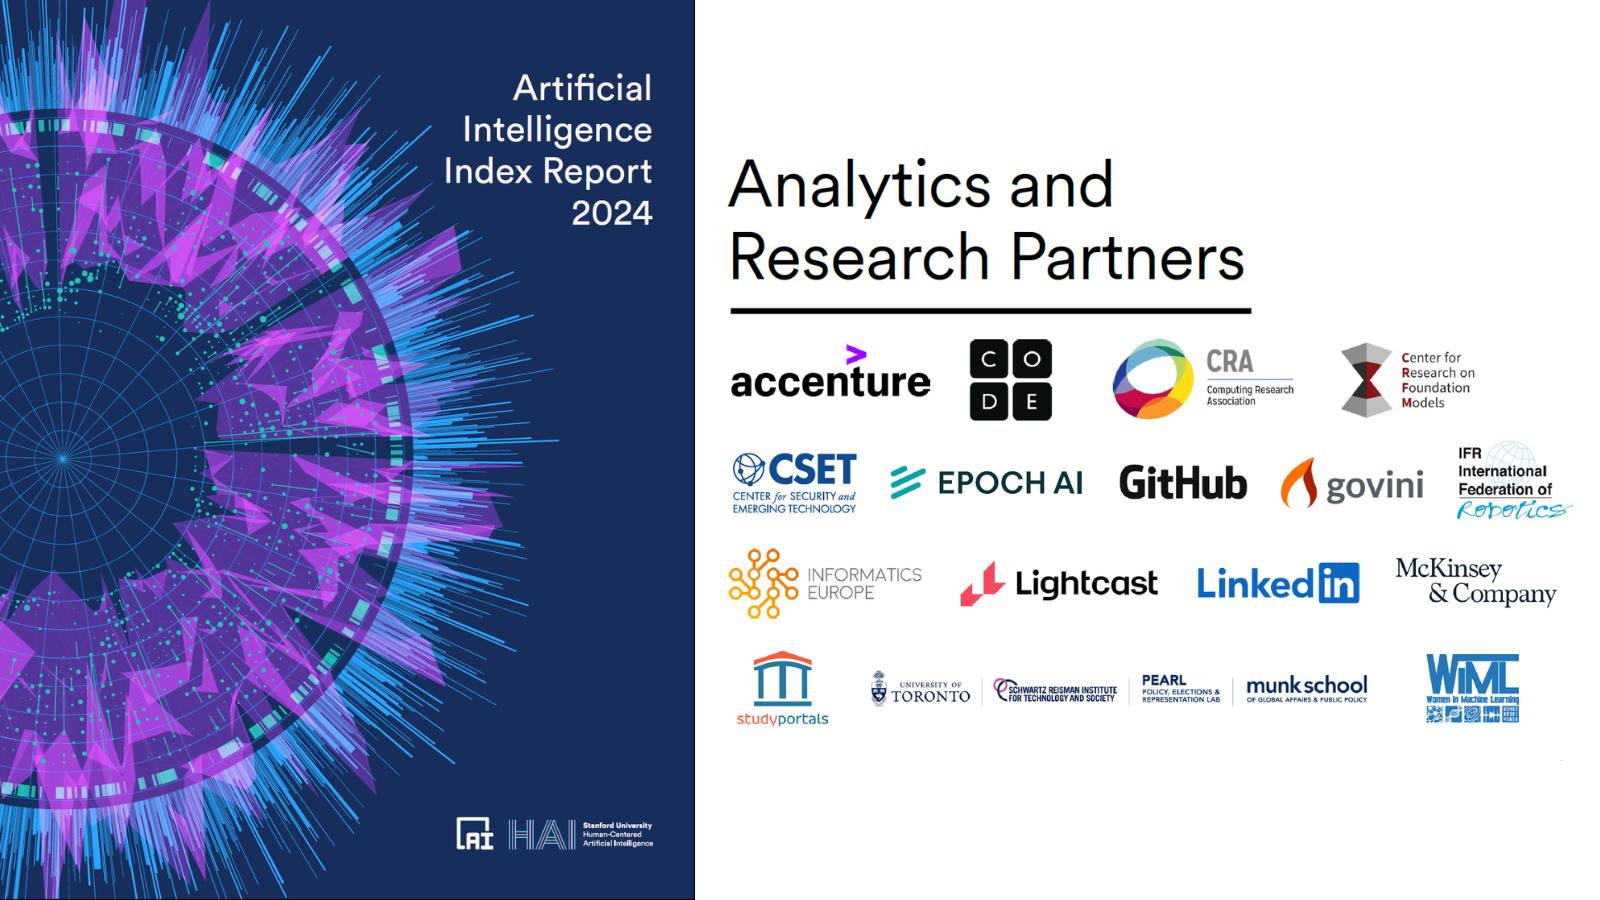 IE featured in Artificial Intelligence Index Report 2024